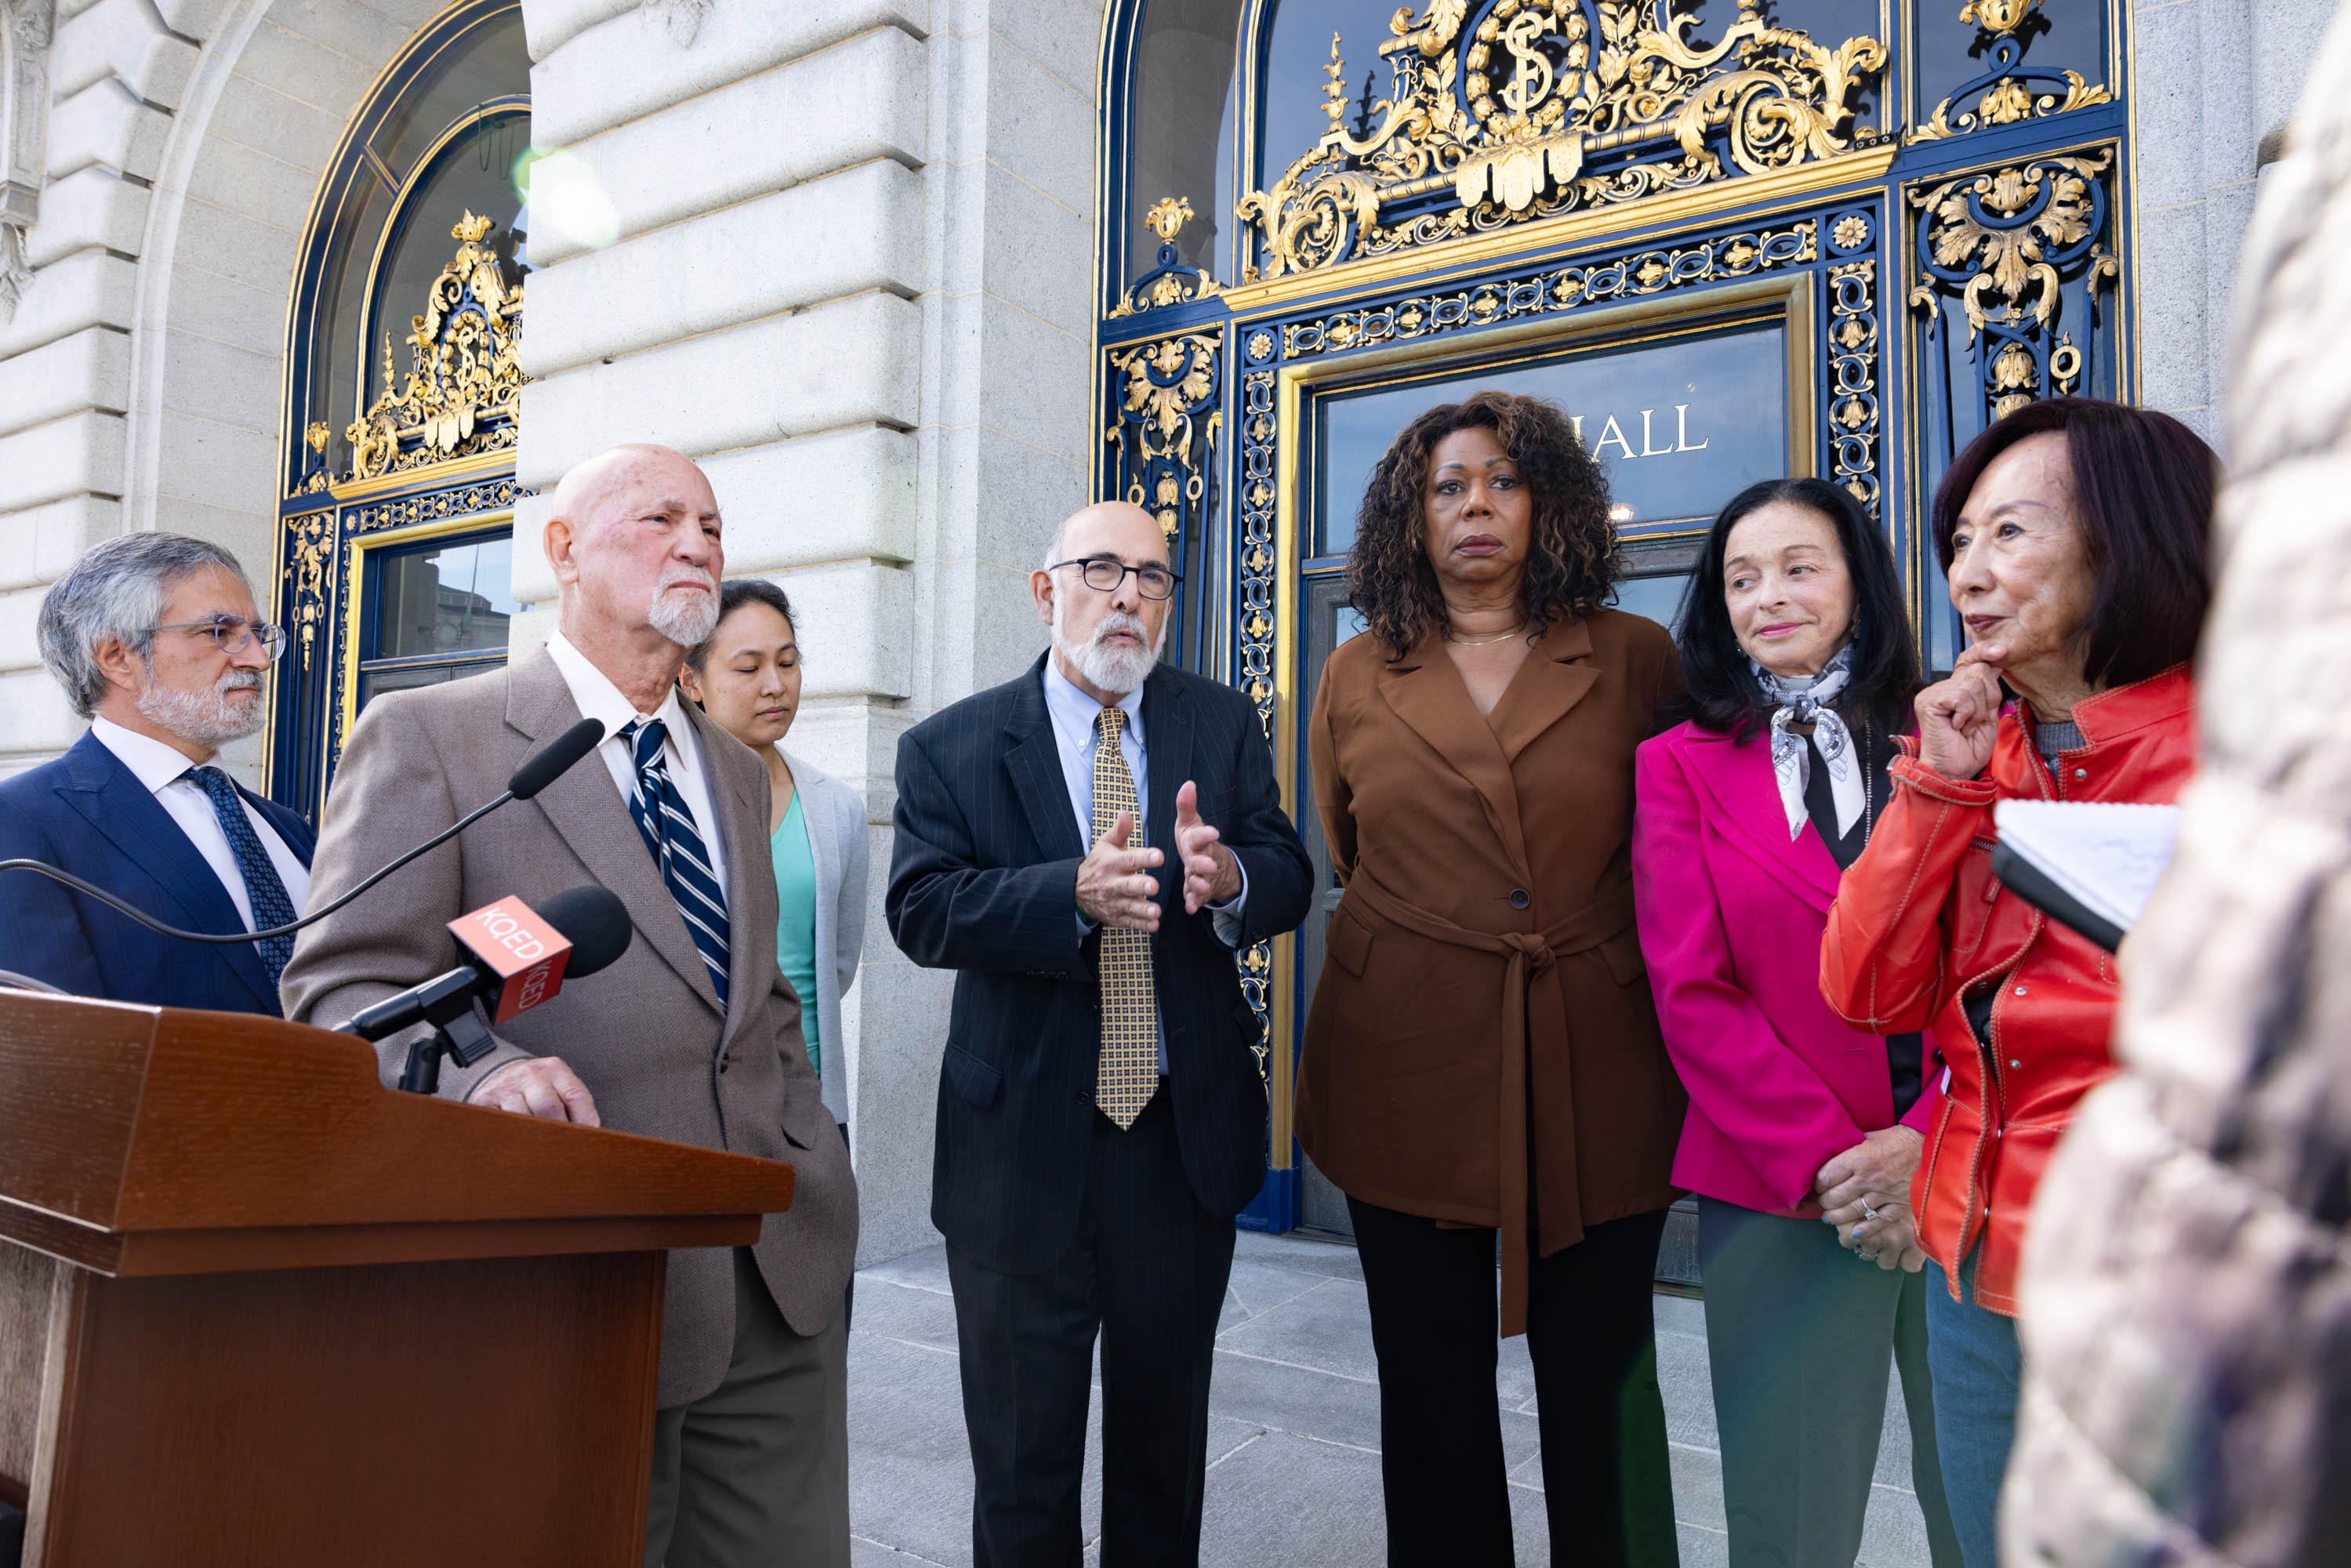 A man in a blue suit gesticulates while standing next to group of people stand im front of a gilded facade of San Francisco's City Hall.